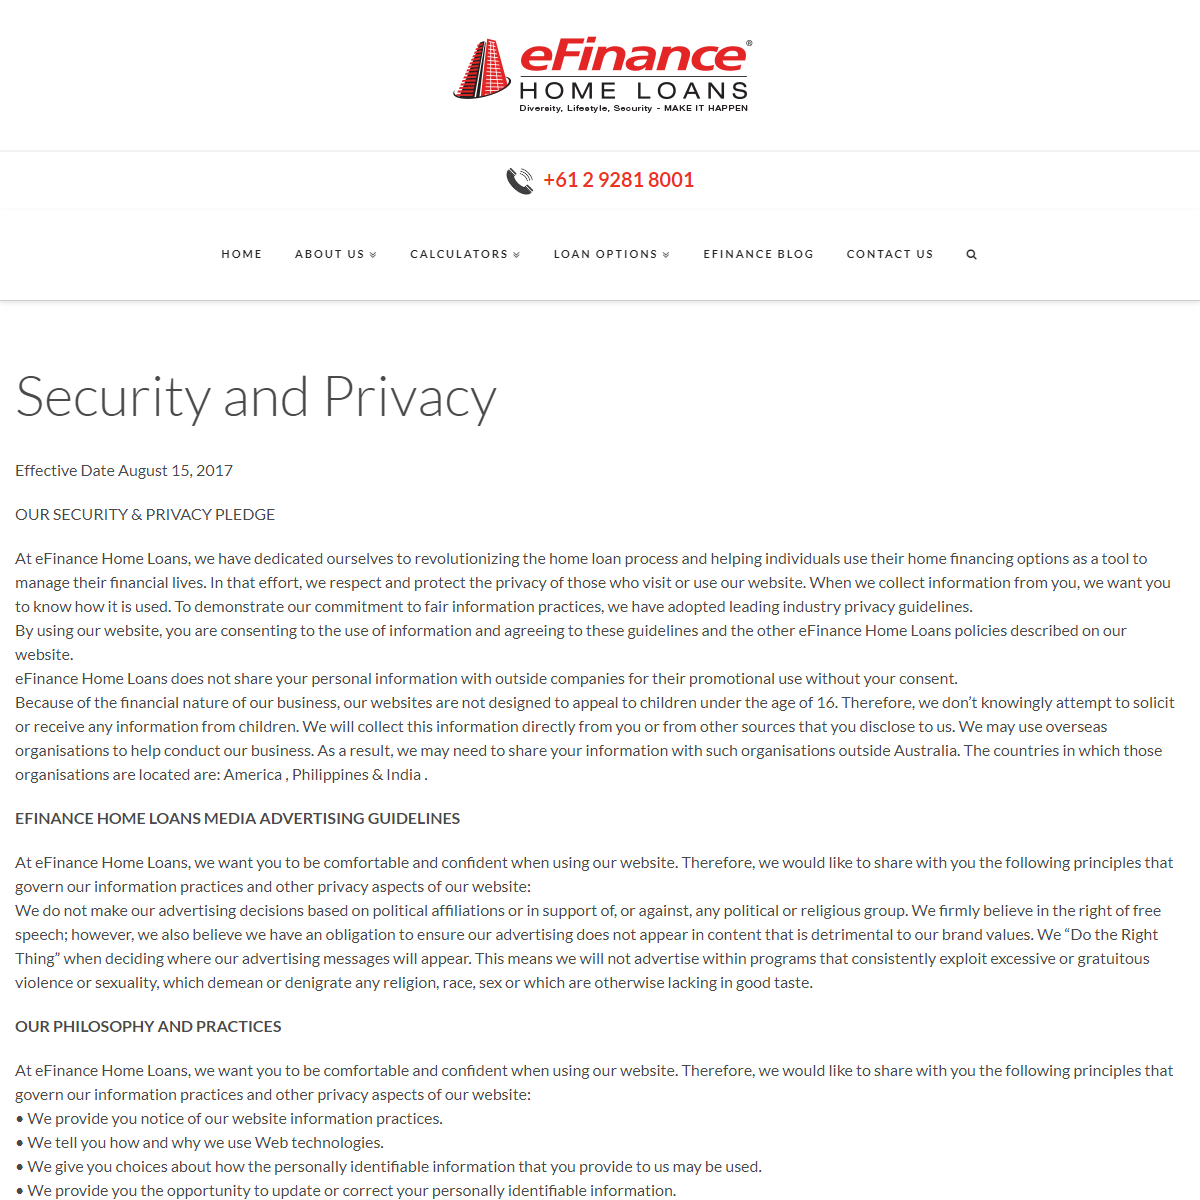 A complete backup of https://www.efinancehomeloans.com.au/security-and-privacy/